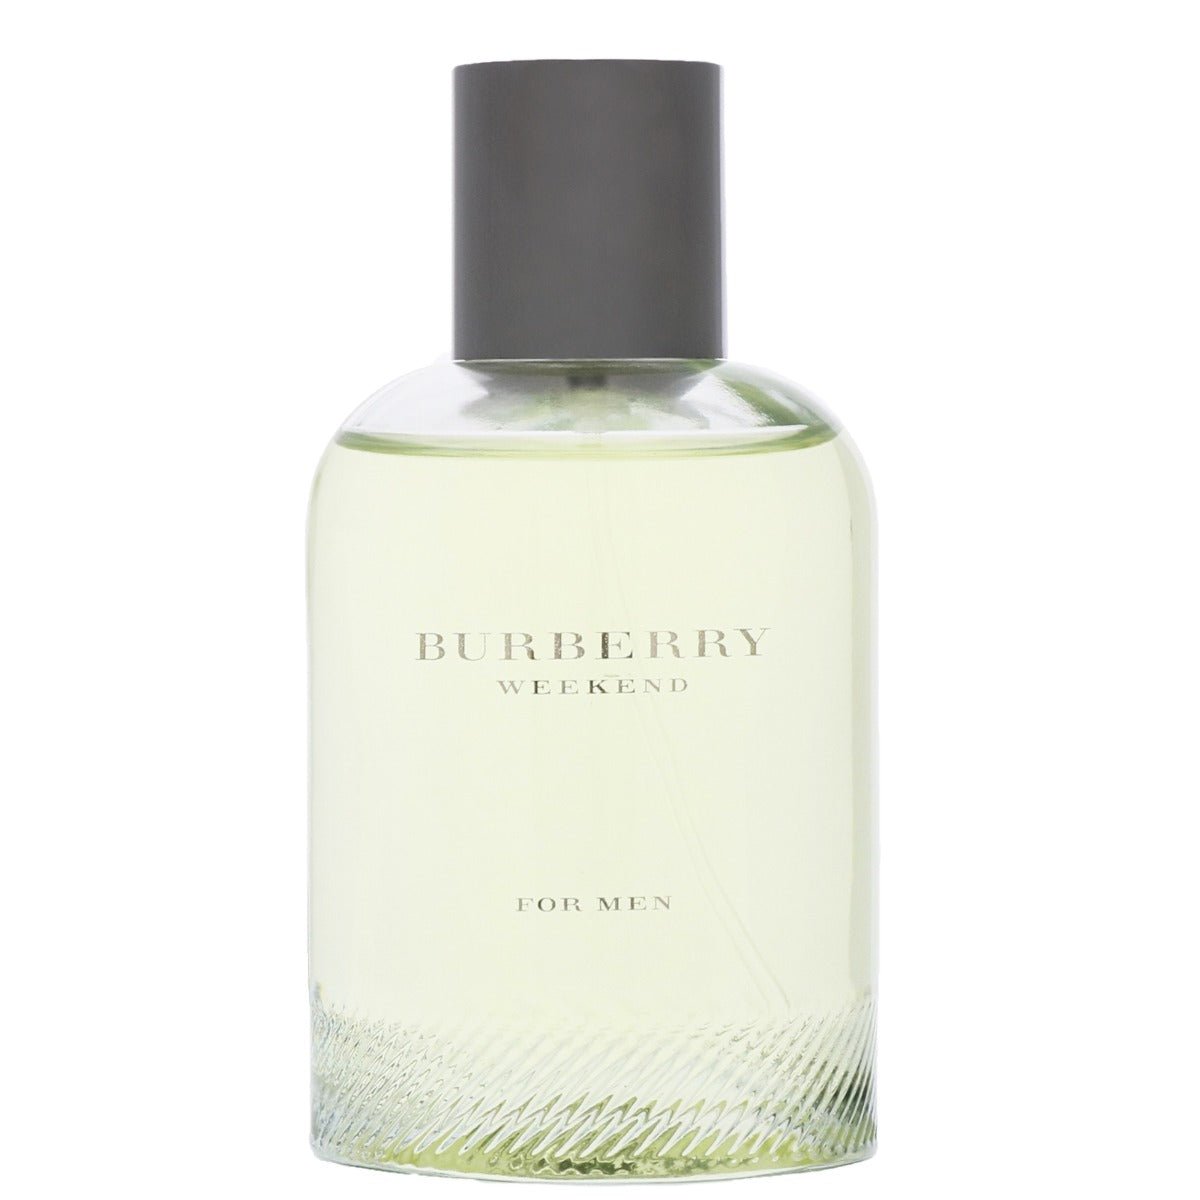 Burberry Weekend For Men Edt 100Ml - AllurebeautypkBurberry Weekend For Men Edt 100Ml